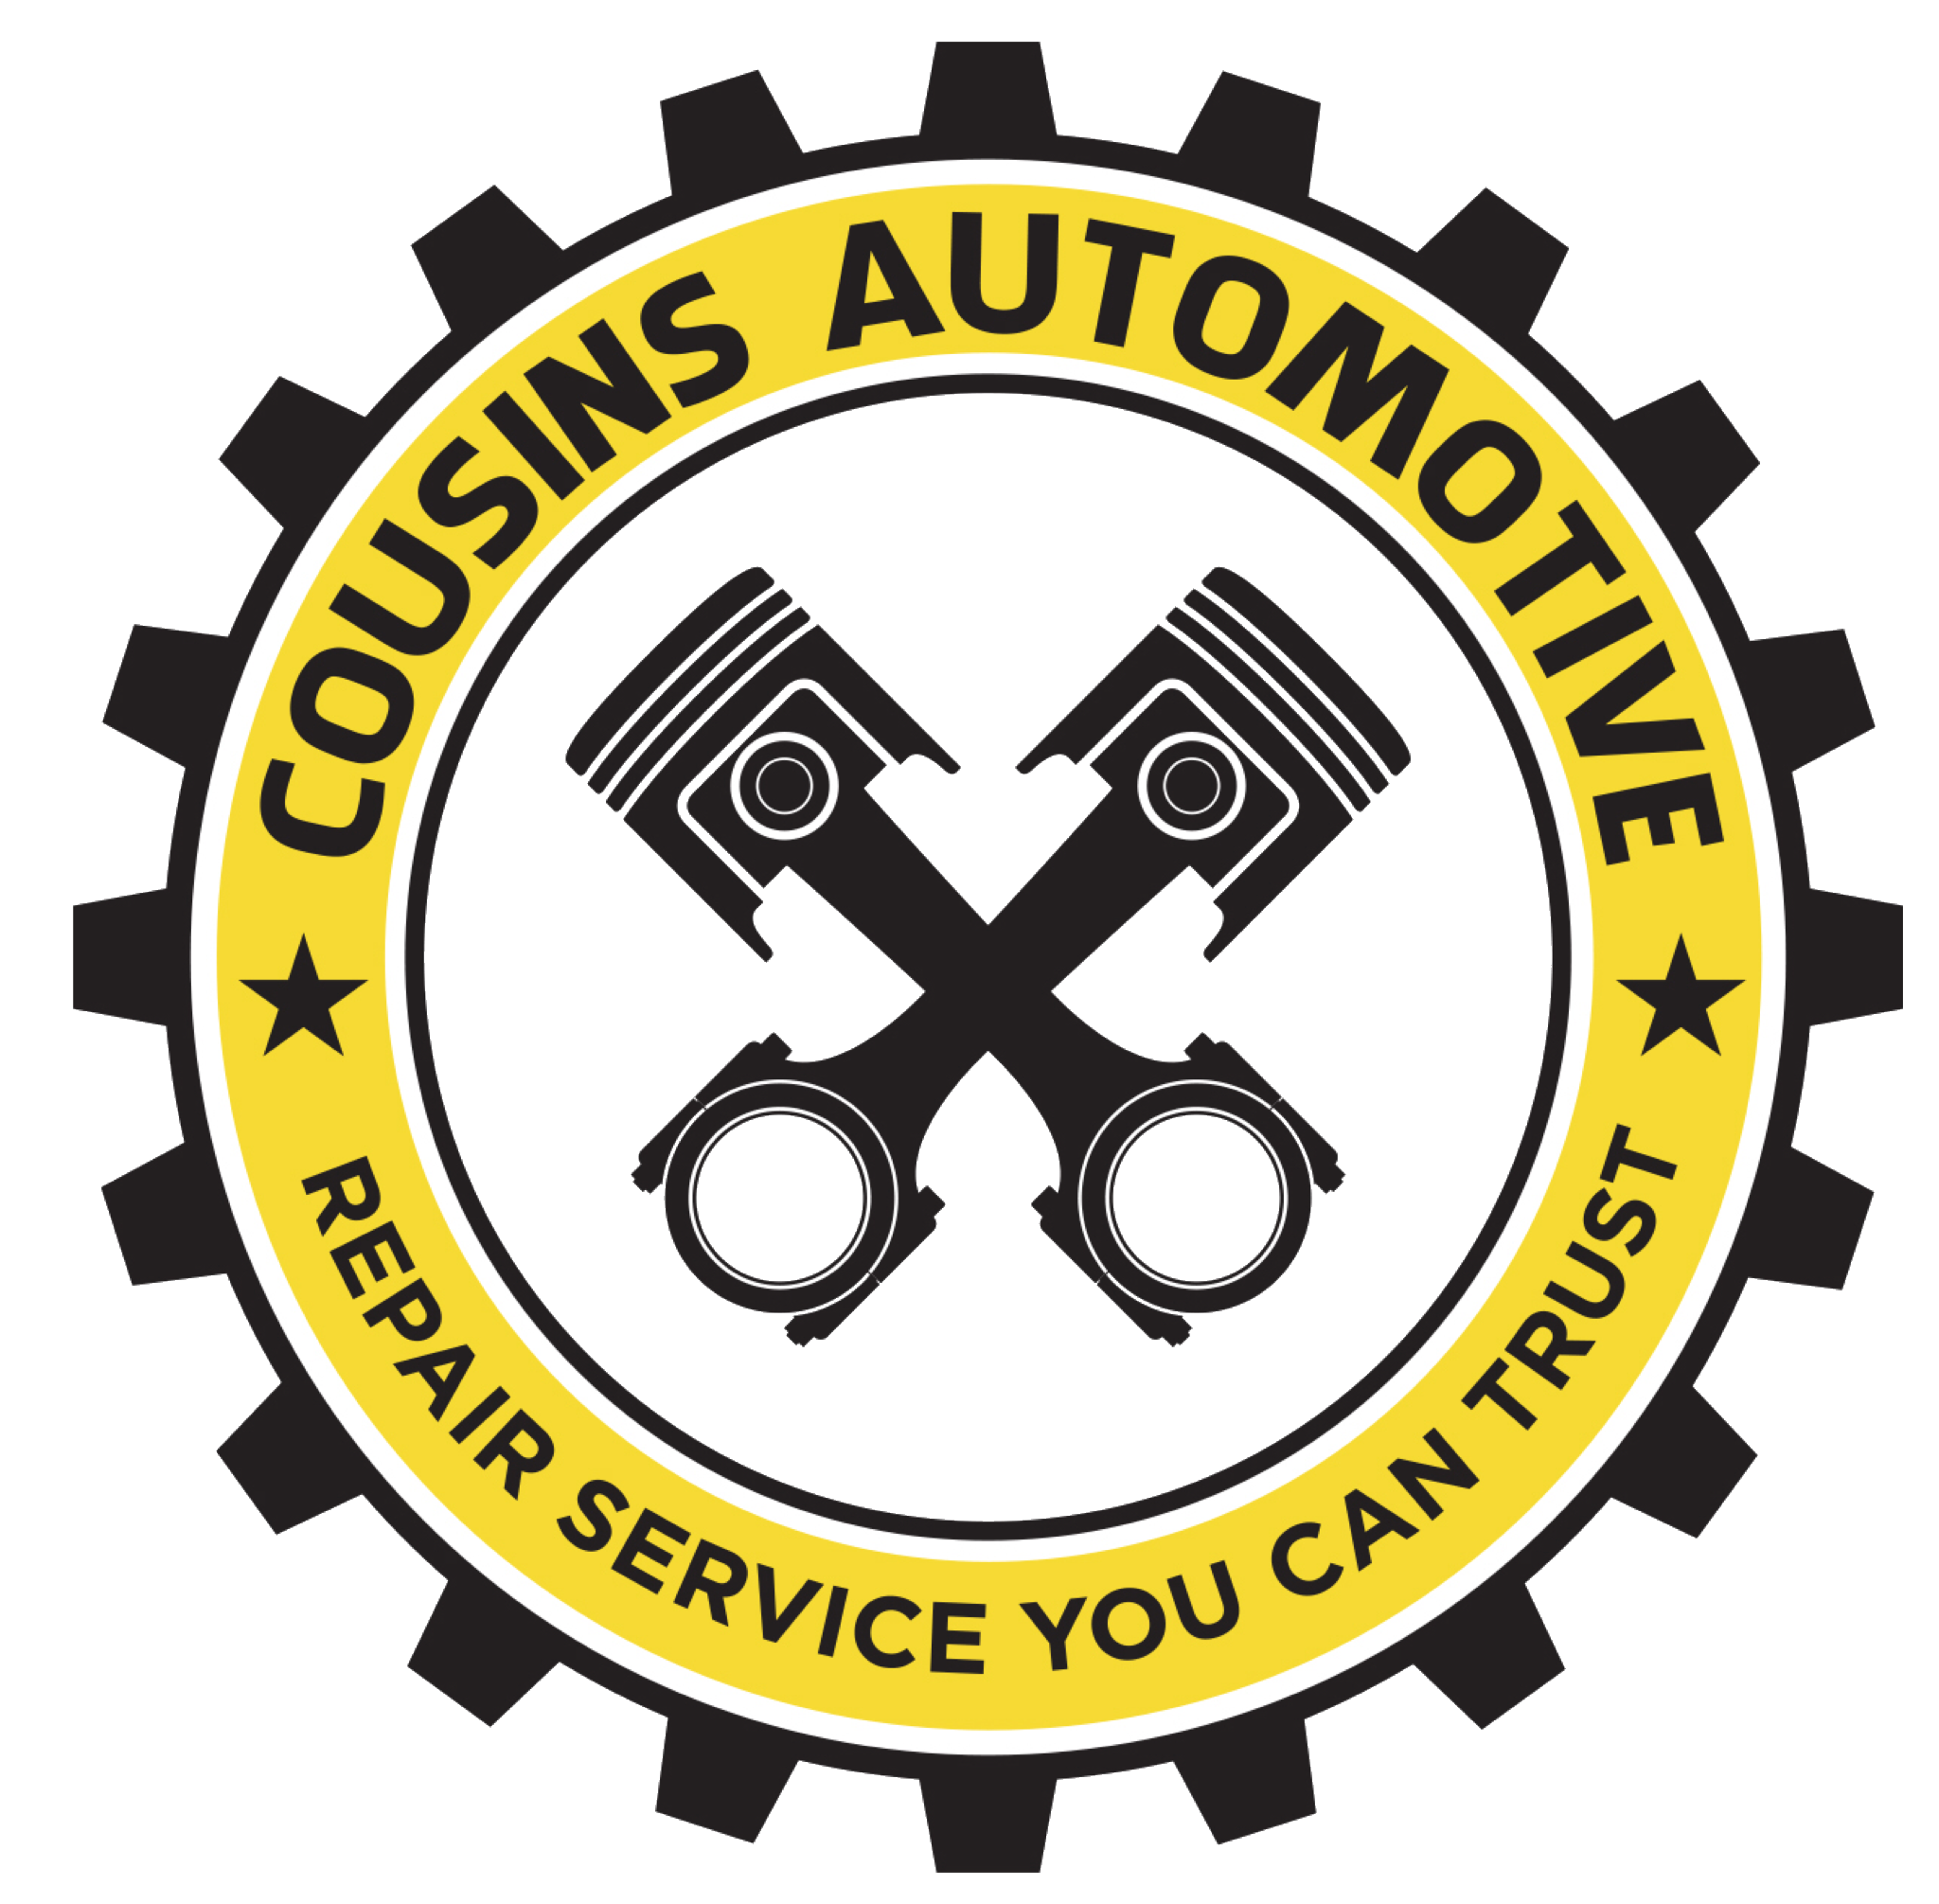 Welcome to Cousins Automotive